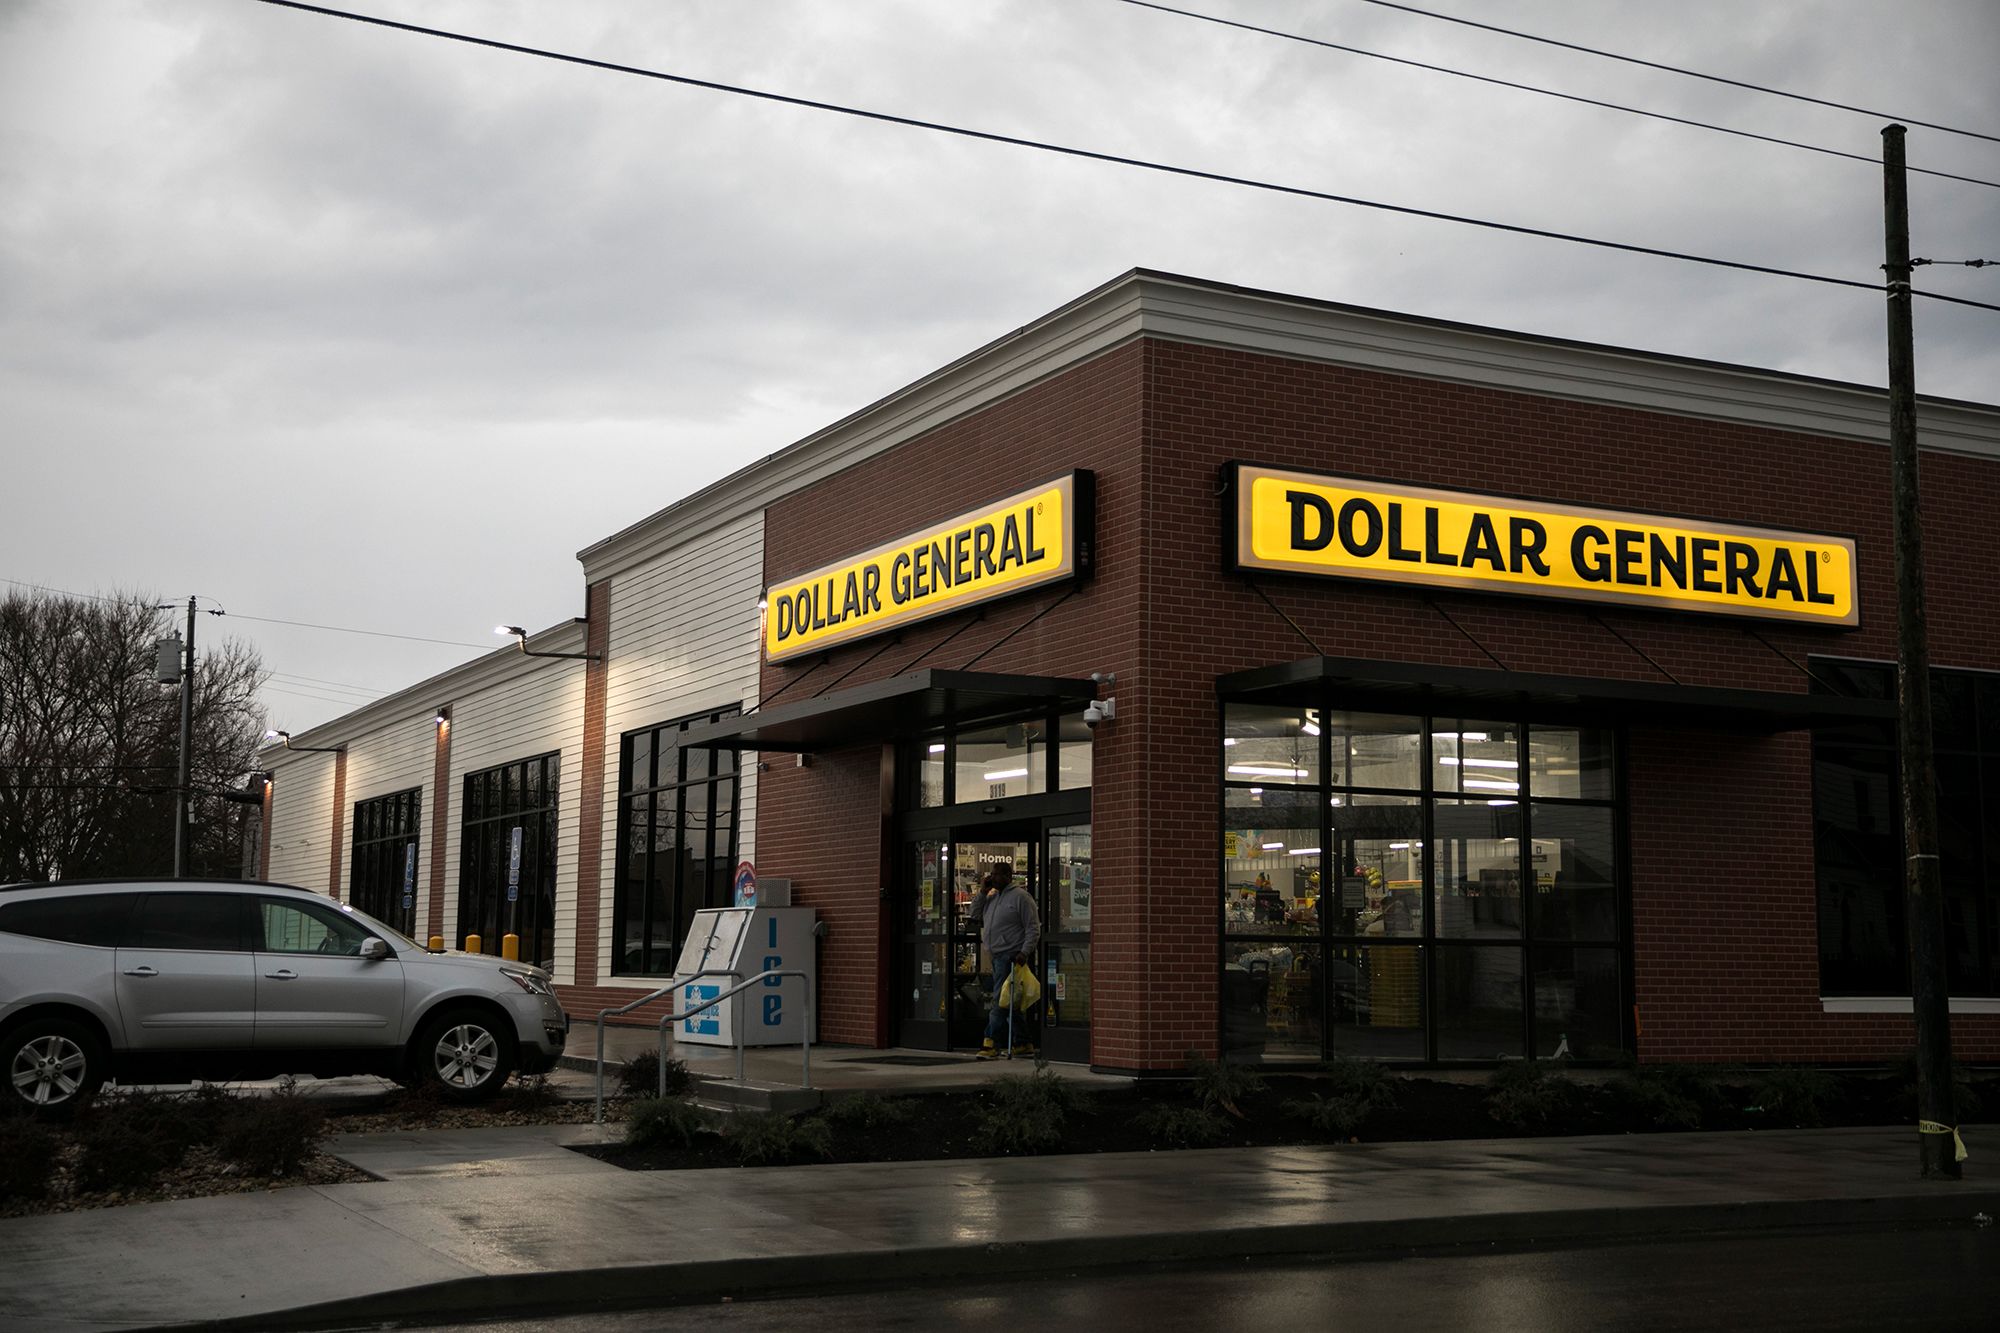 Workers protesting for safer conditions at Dollar General, were 49 people have been killed since 2014.